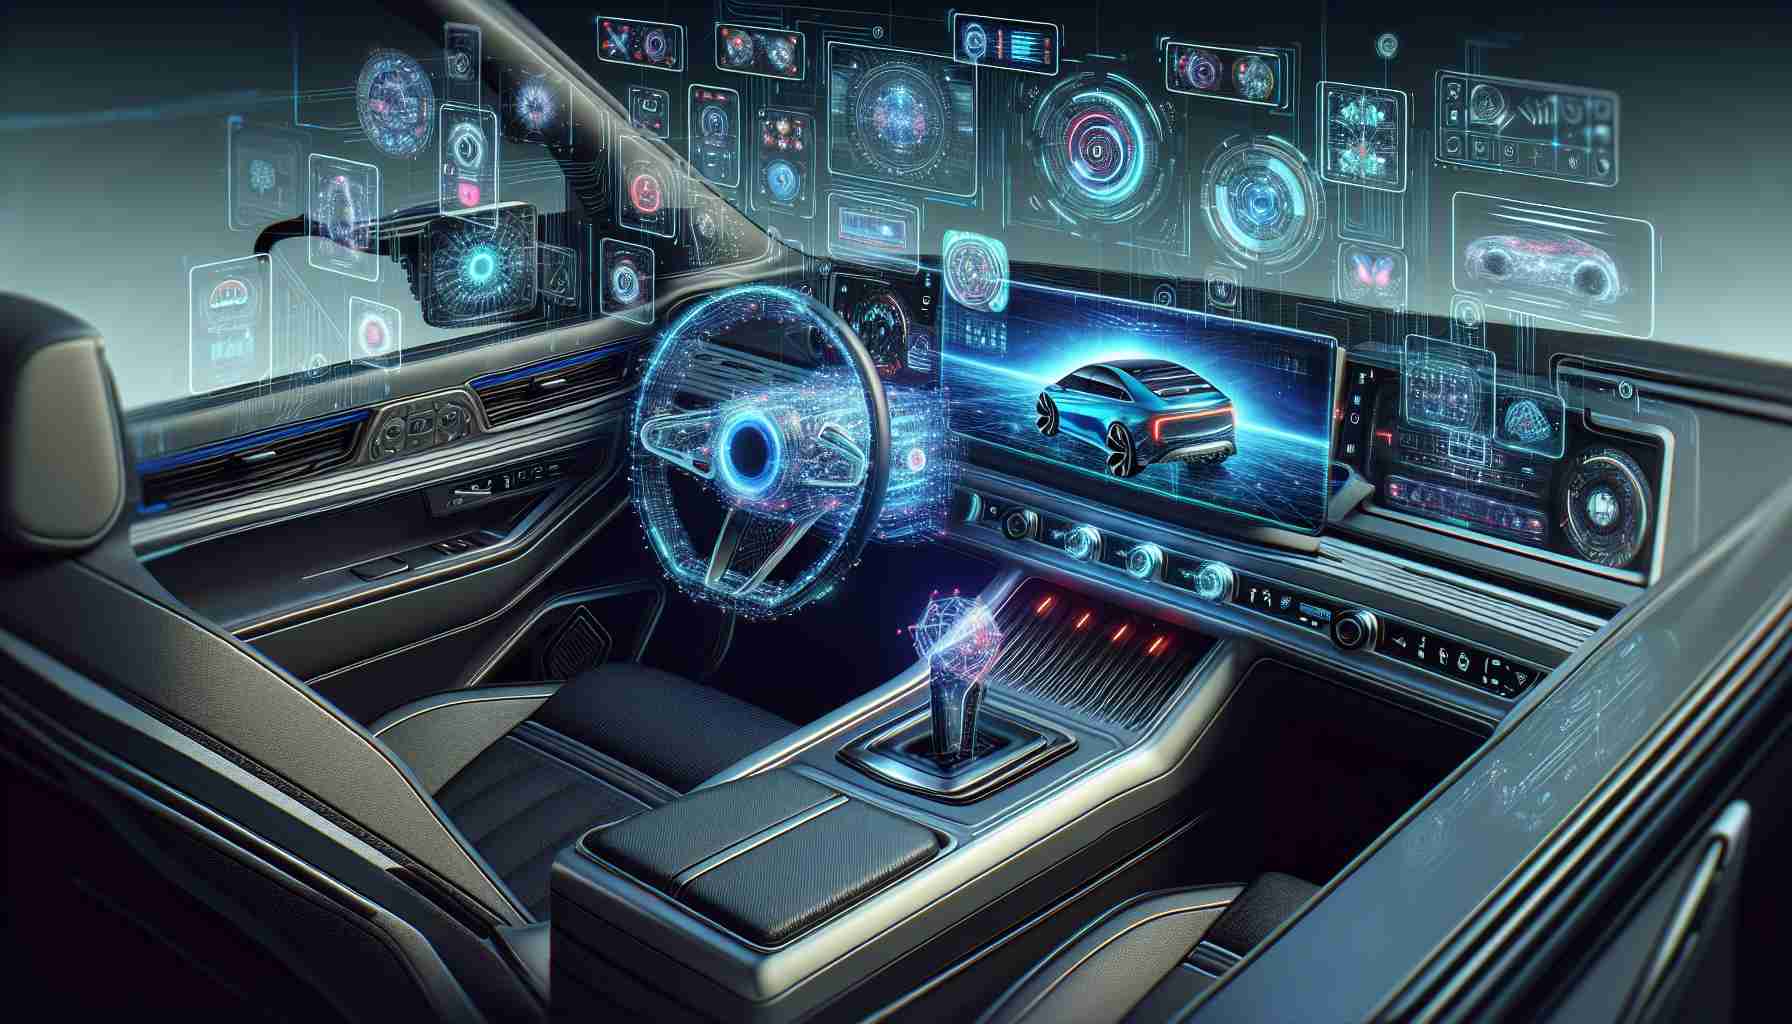 Automotive Giants and Tech Firms Revolutionize Driving with Smart Cockpit Integration